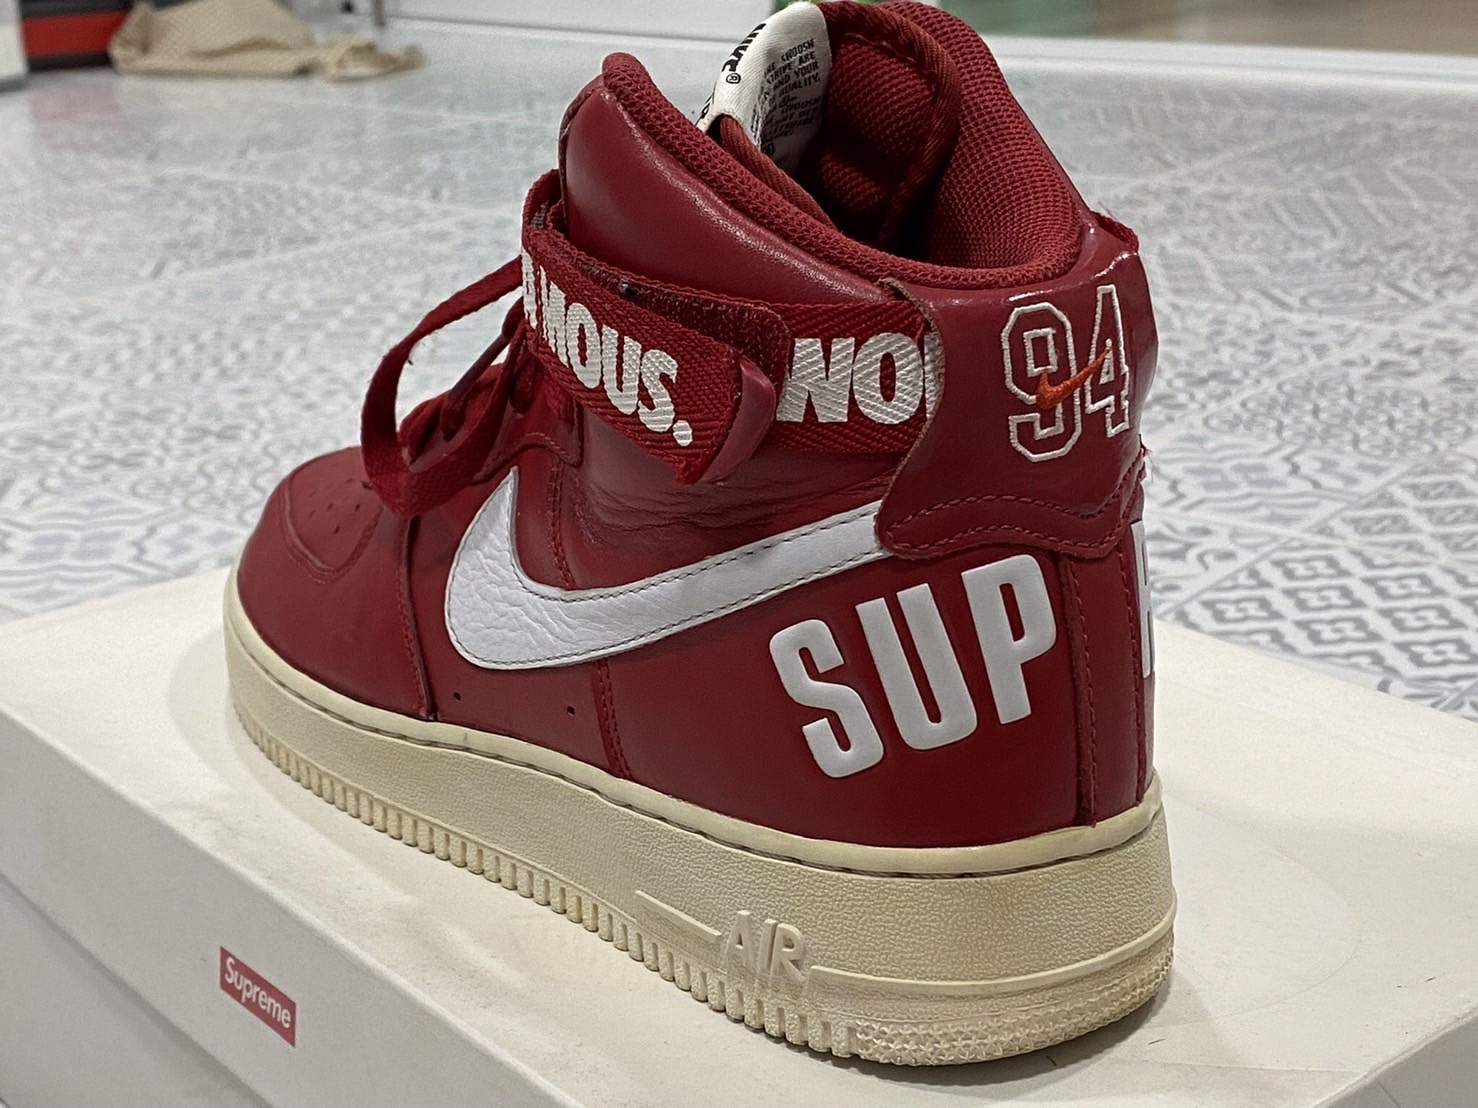 Nike Air Force 1 High Supreme World Famous Red Men's - 698696-610 - US